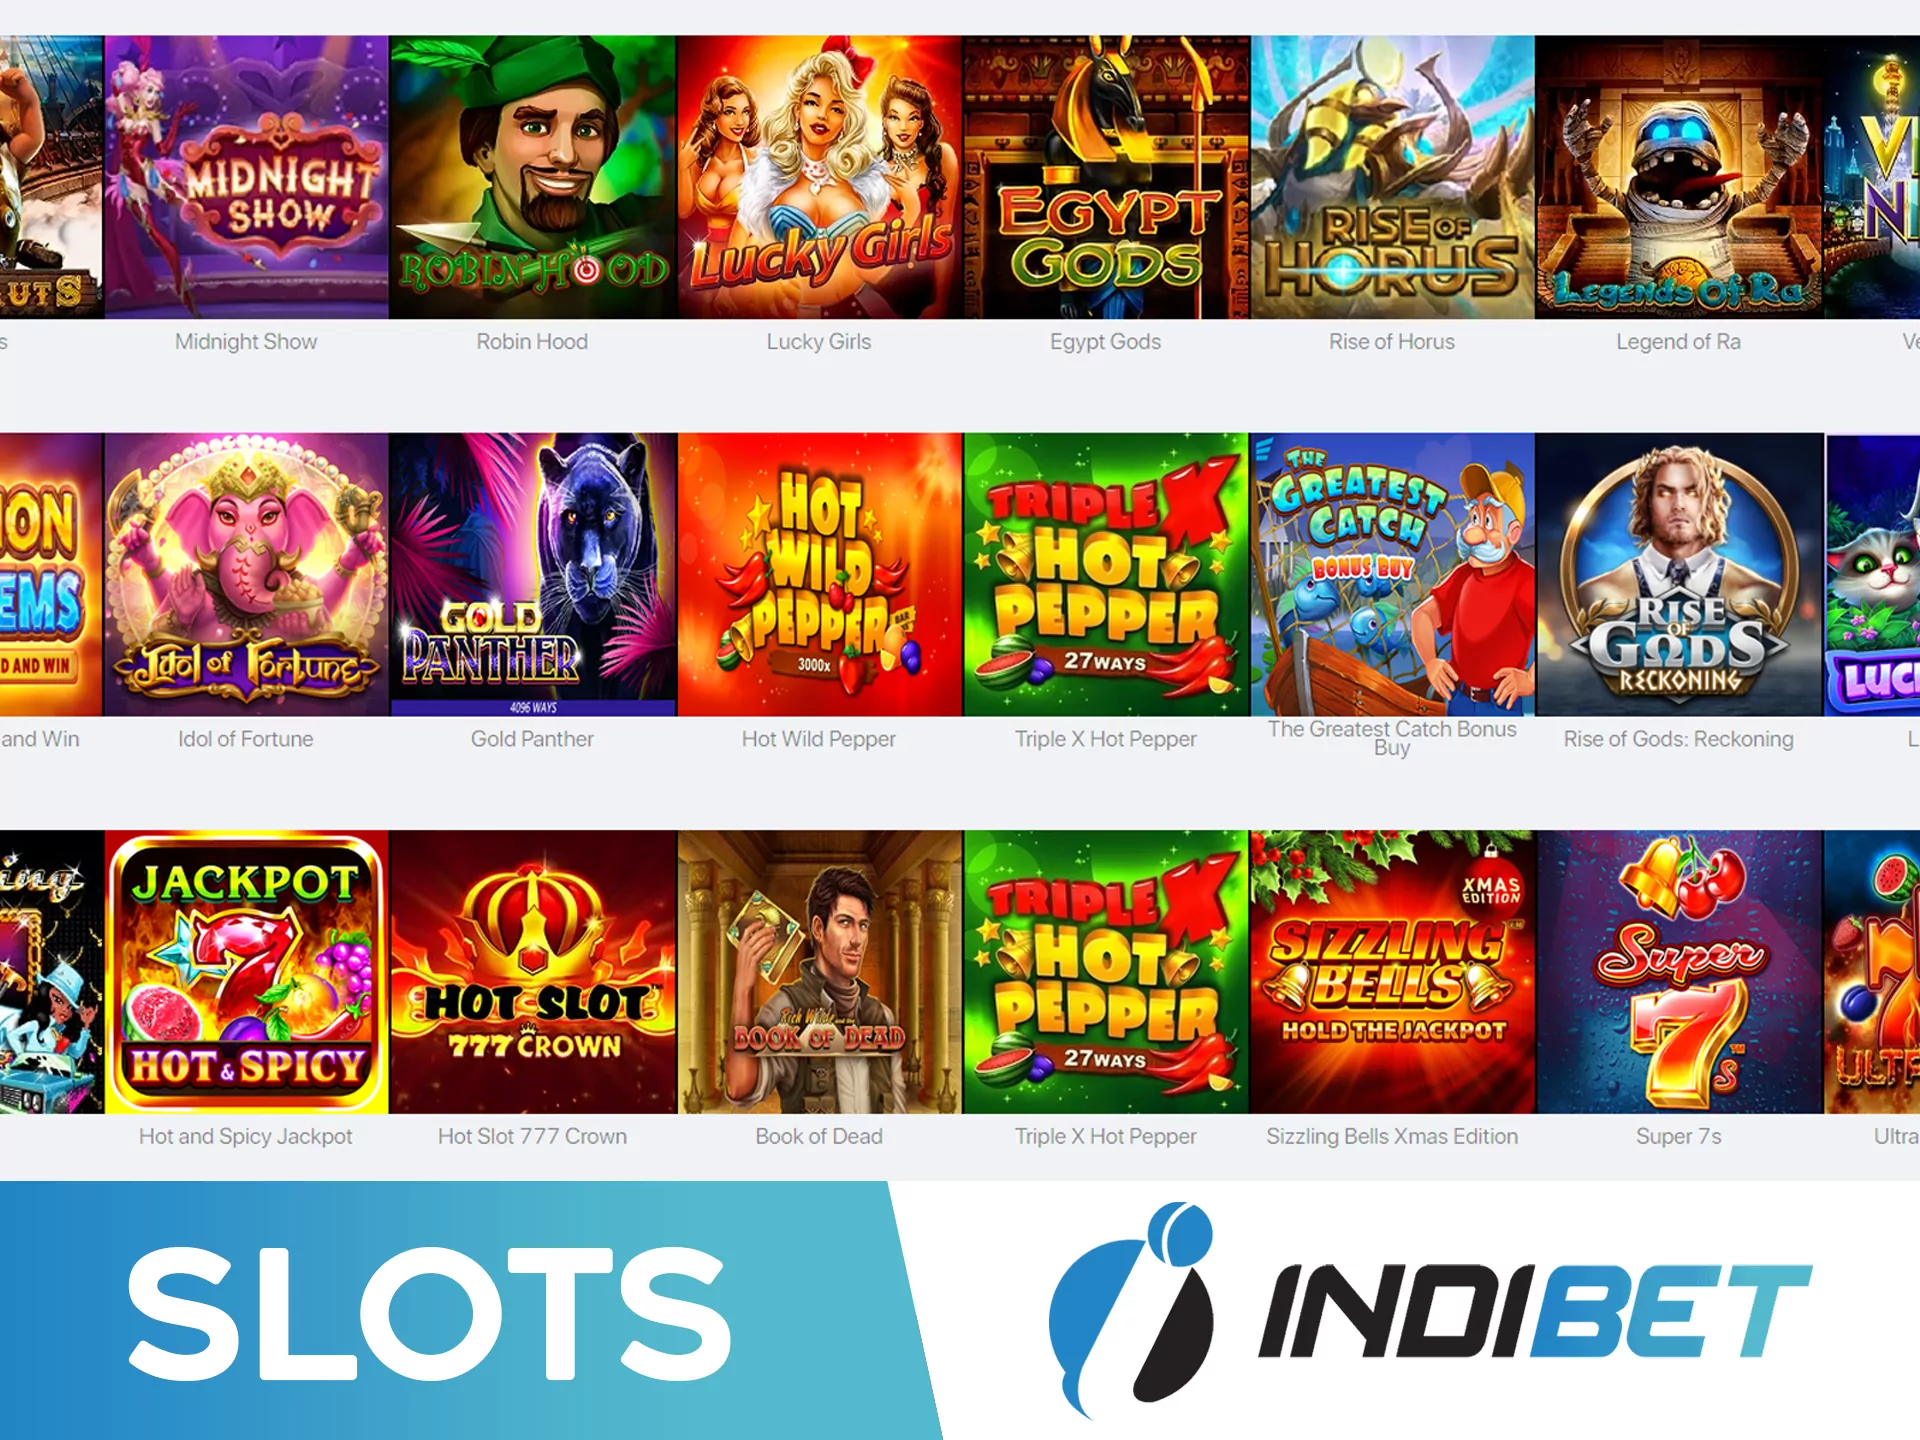 Indibet offers a lot of slots from trustworthy providers.